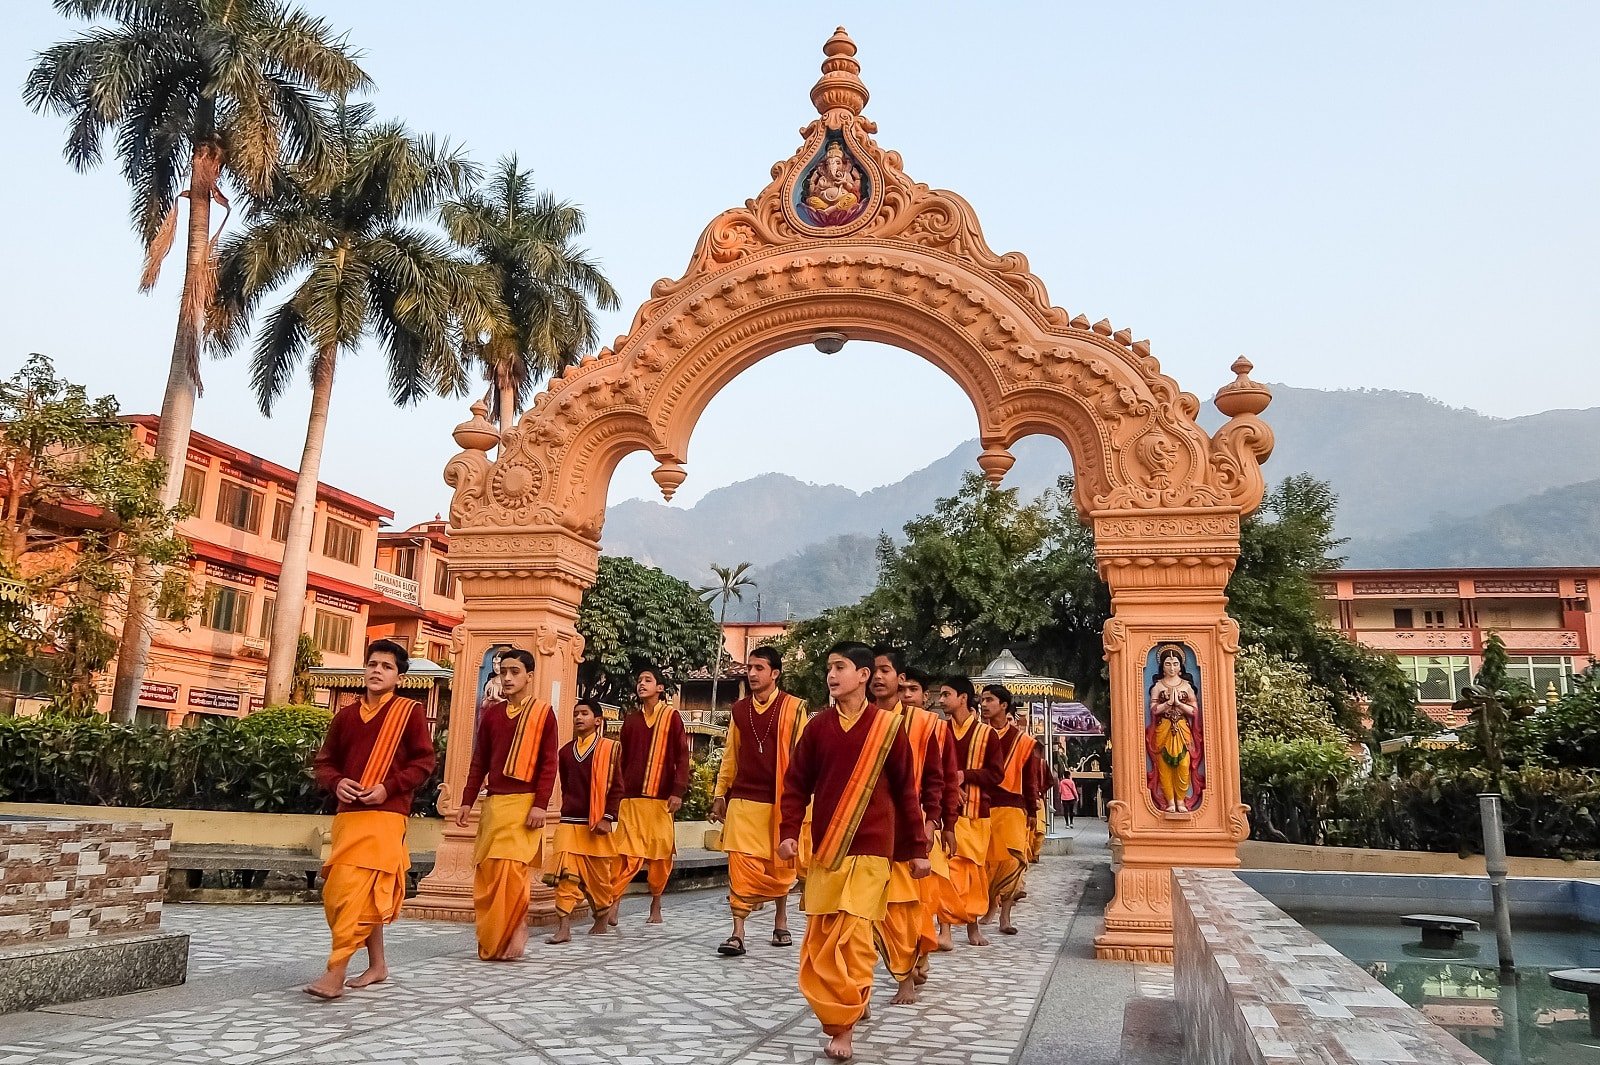 <p><span>Visit Rishikesh, the birthplace of yoga, between March and April or September to October for ideal weather. This sacred city on the banks of the Ganges River is dotted with ashrams, offering immersive yoga experiences. Retreats here often combine yoga with Ayurvedic treatments and spiritual teachings.</span></p> <p><b>Parmarth Niketan Retreat Highlight:</b></p> <p><span>Located on the banks of the Ganges, Parmarth Niketan is one of the largest ashrams in Rishikesh, offering traditional yoga practices, spiritual classes, and the opportunity to partake in the Ganga Aarti ceremony.</span></p> <p><b>Insider’s Tip: </b><span>Attend the Ganga Aarti, a spiritual river worship ceremony, for a unique cultural experience.</span></p> <p><b>Travel Details: </b><span>Fly to Dehradun Airport and take a taxi or bus to Rishikesh.</span></p>